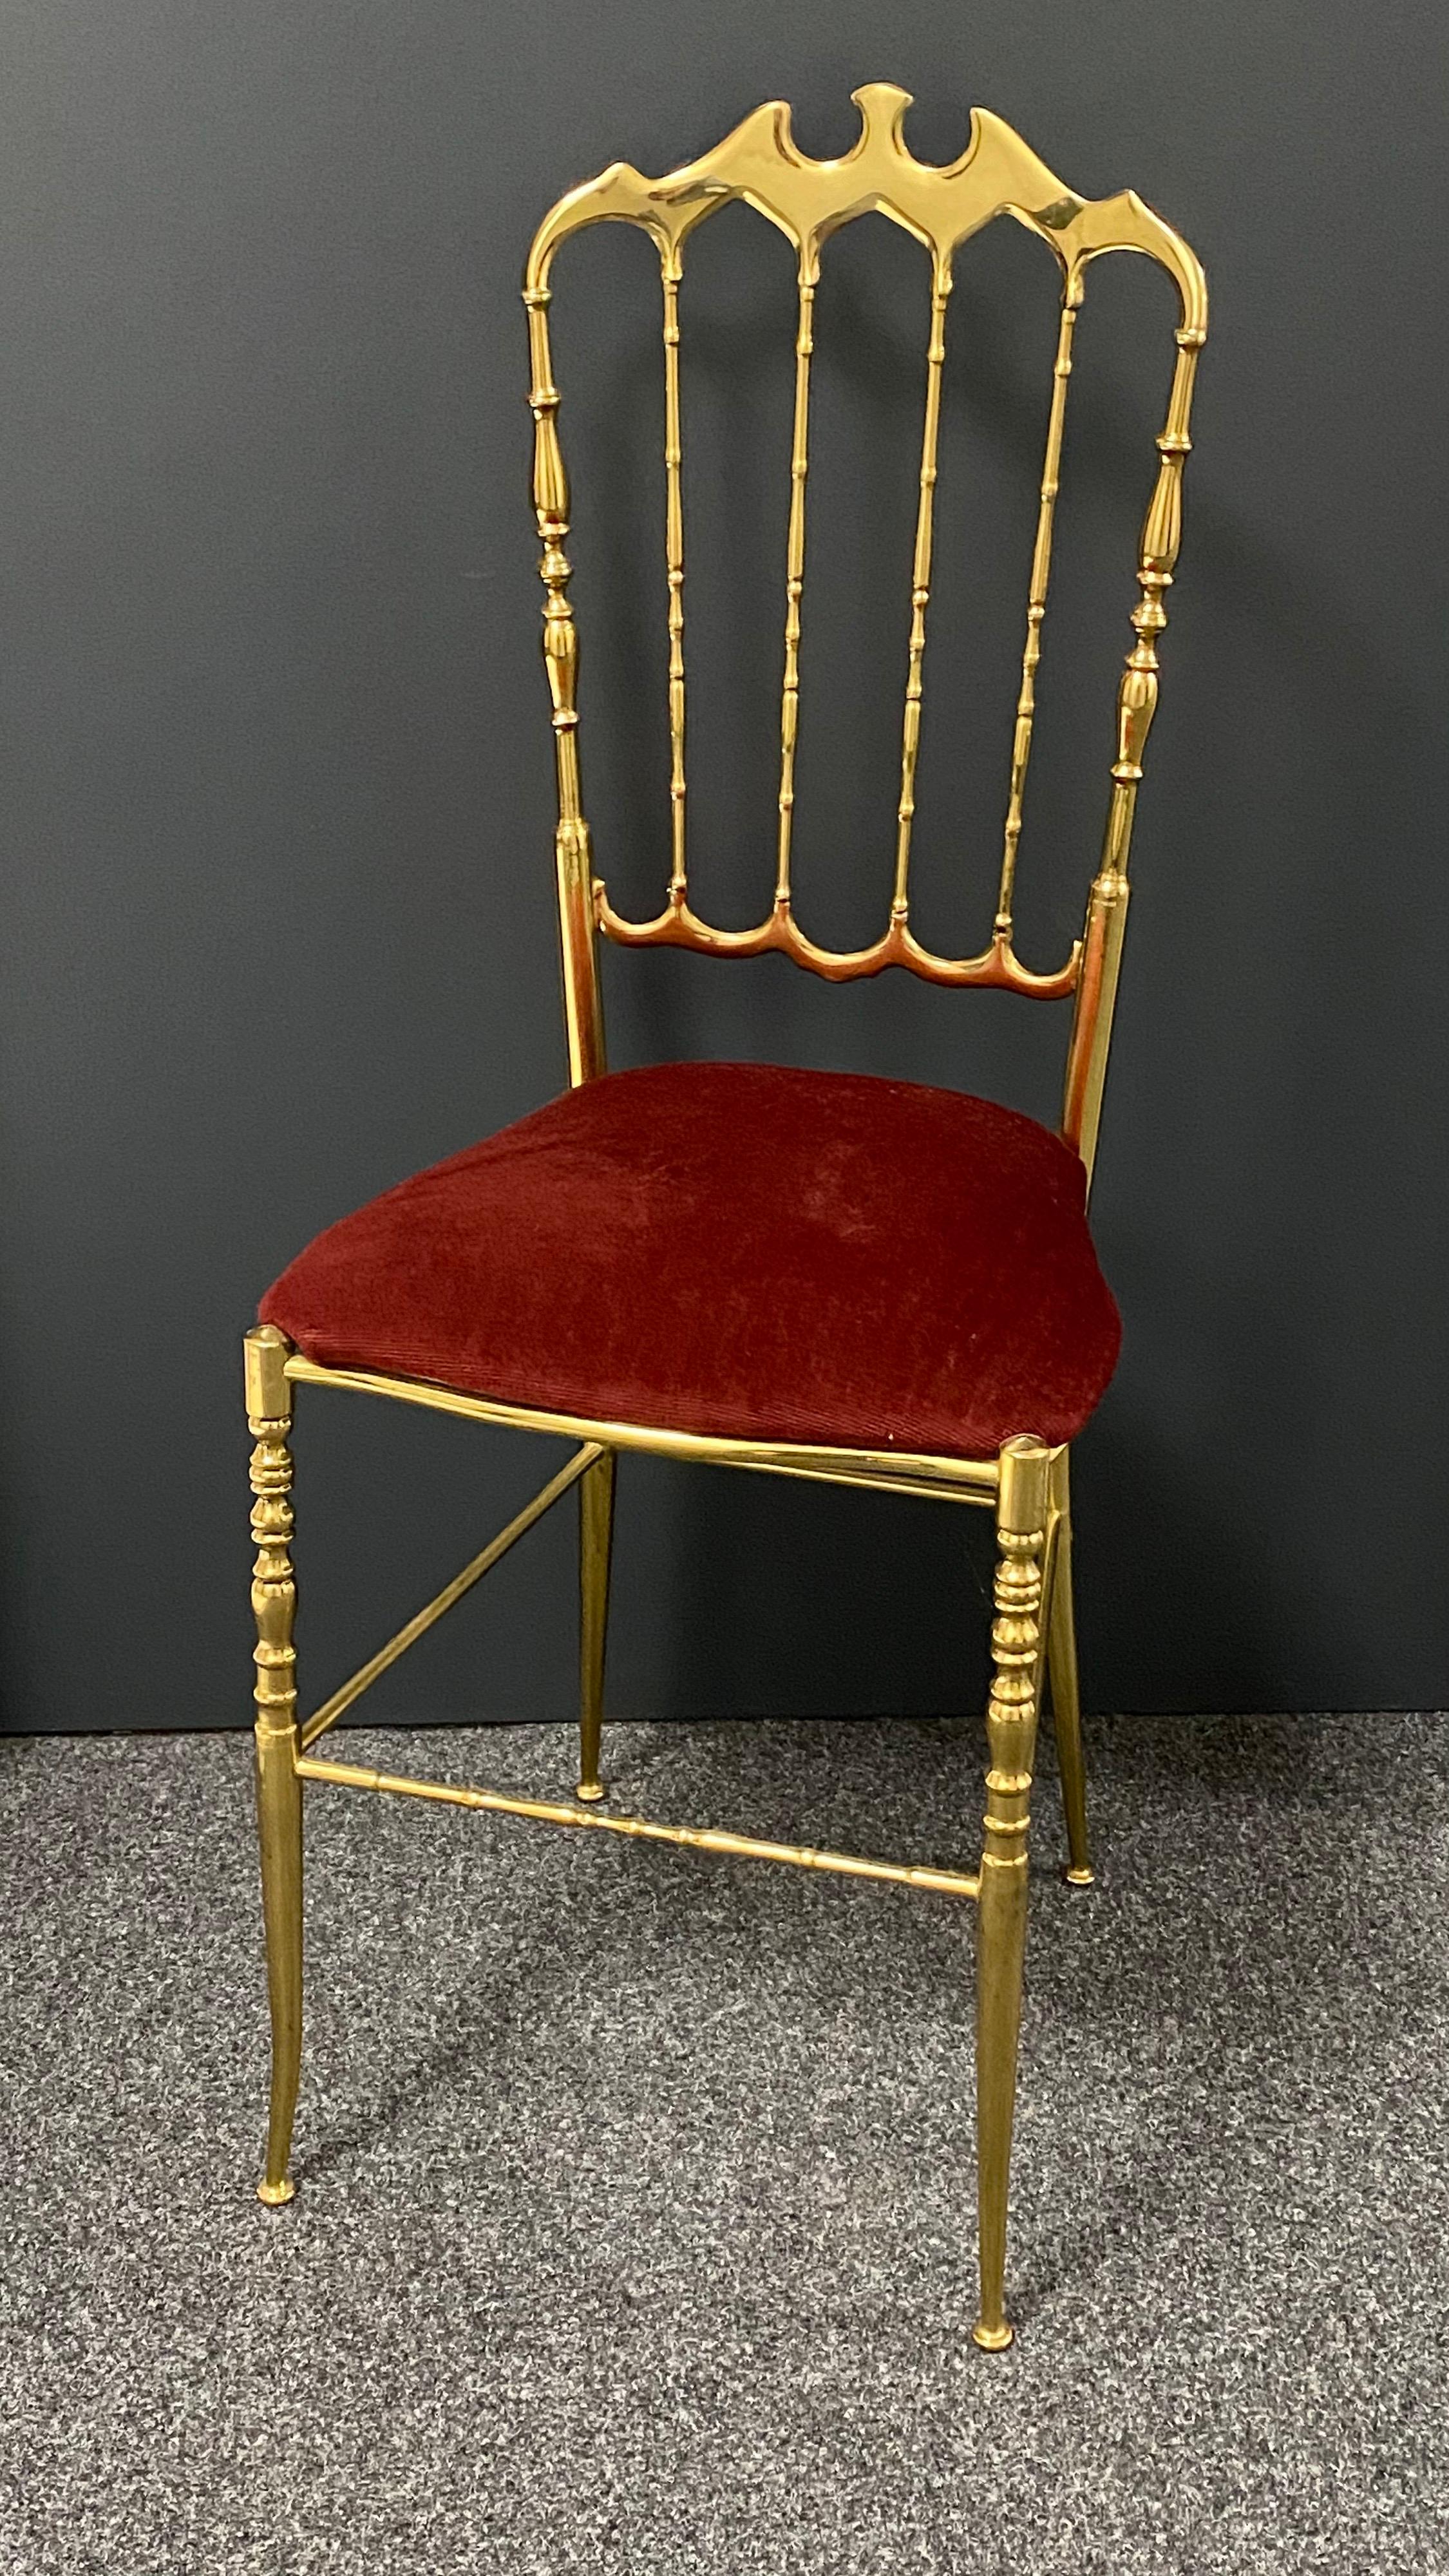 Offered is a solid brass desk chair by Chiavari, circa 1950. It shows some minor scratches, also patina and has got the original velvet upholstery. Minor patina gives this pieces a classy statement.